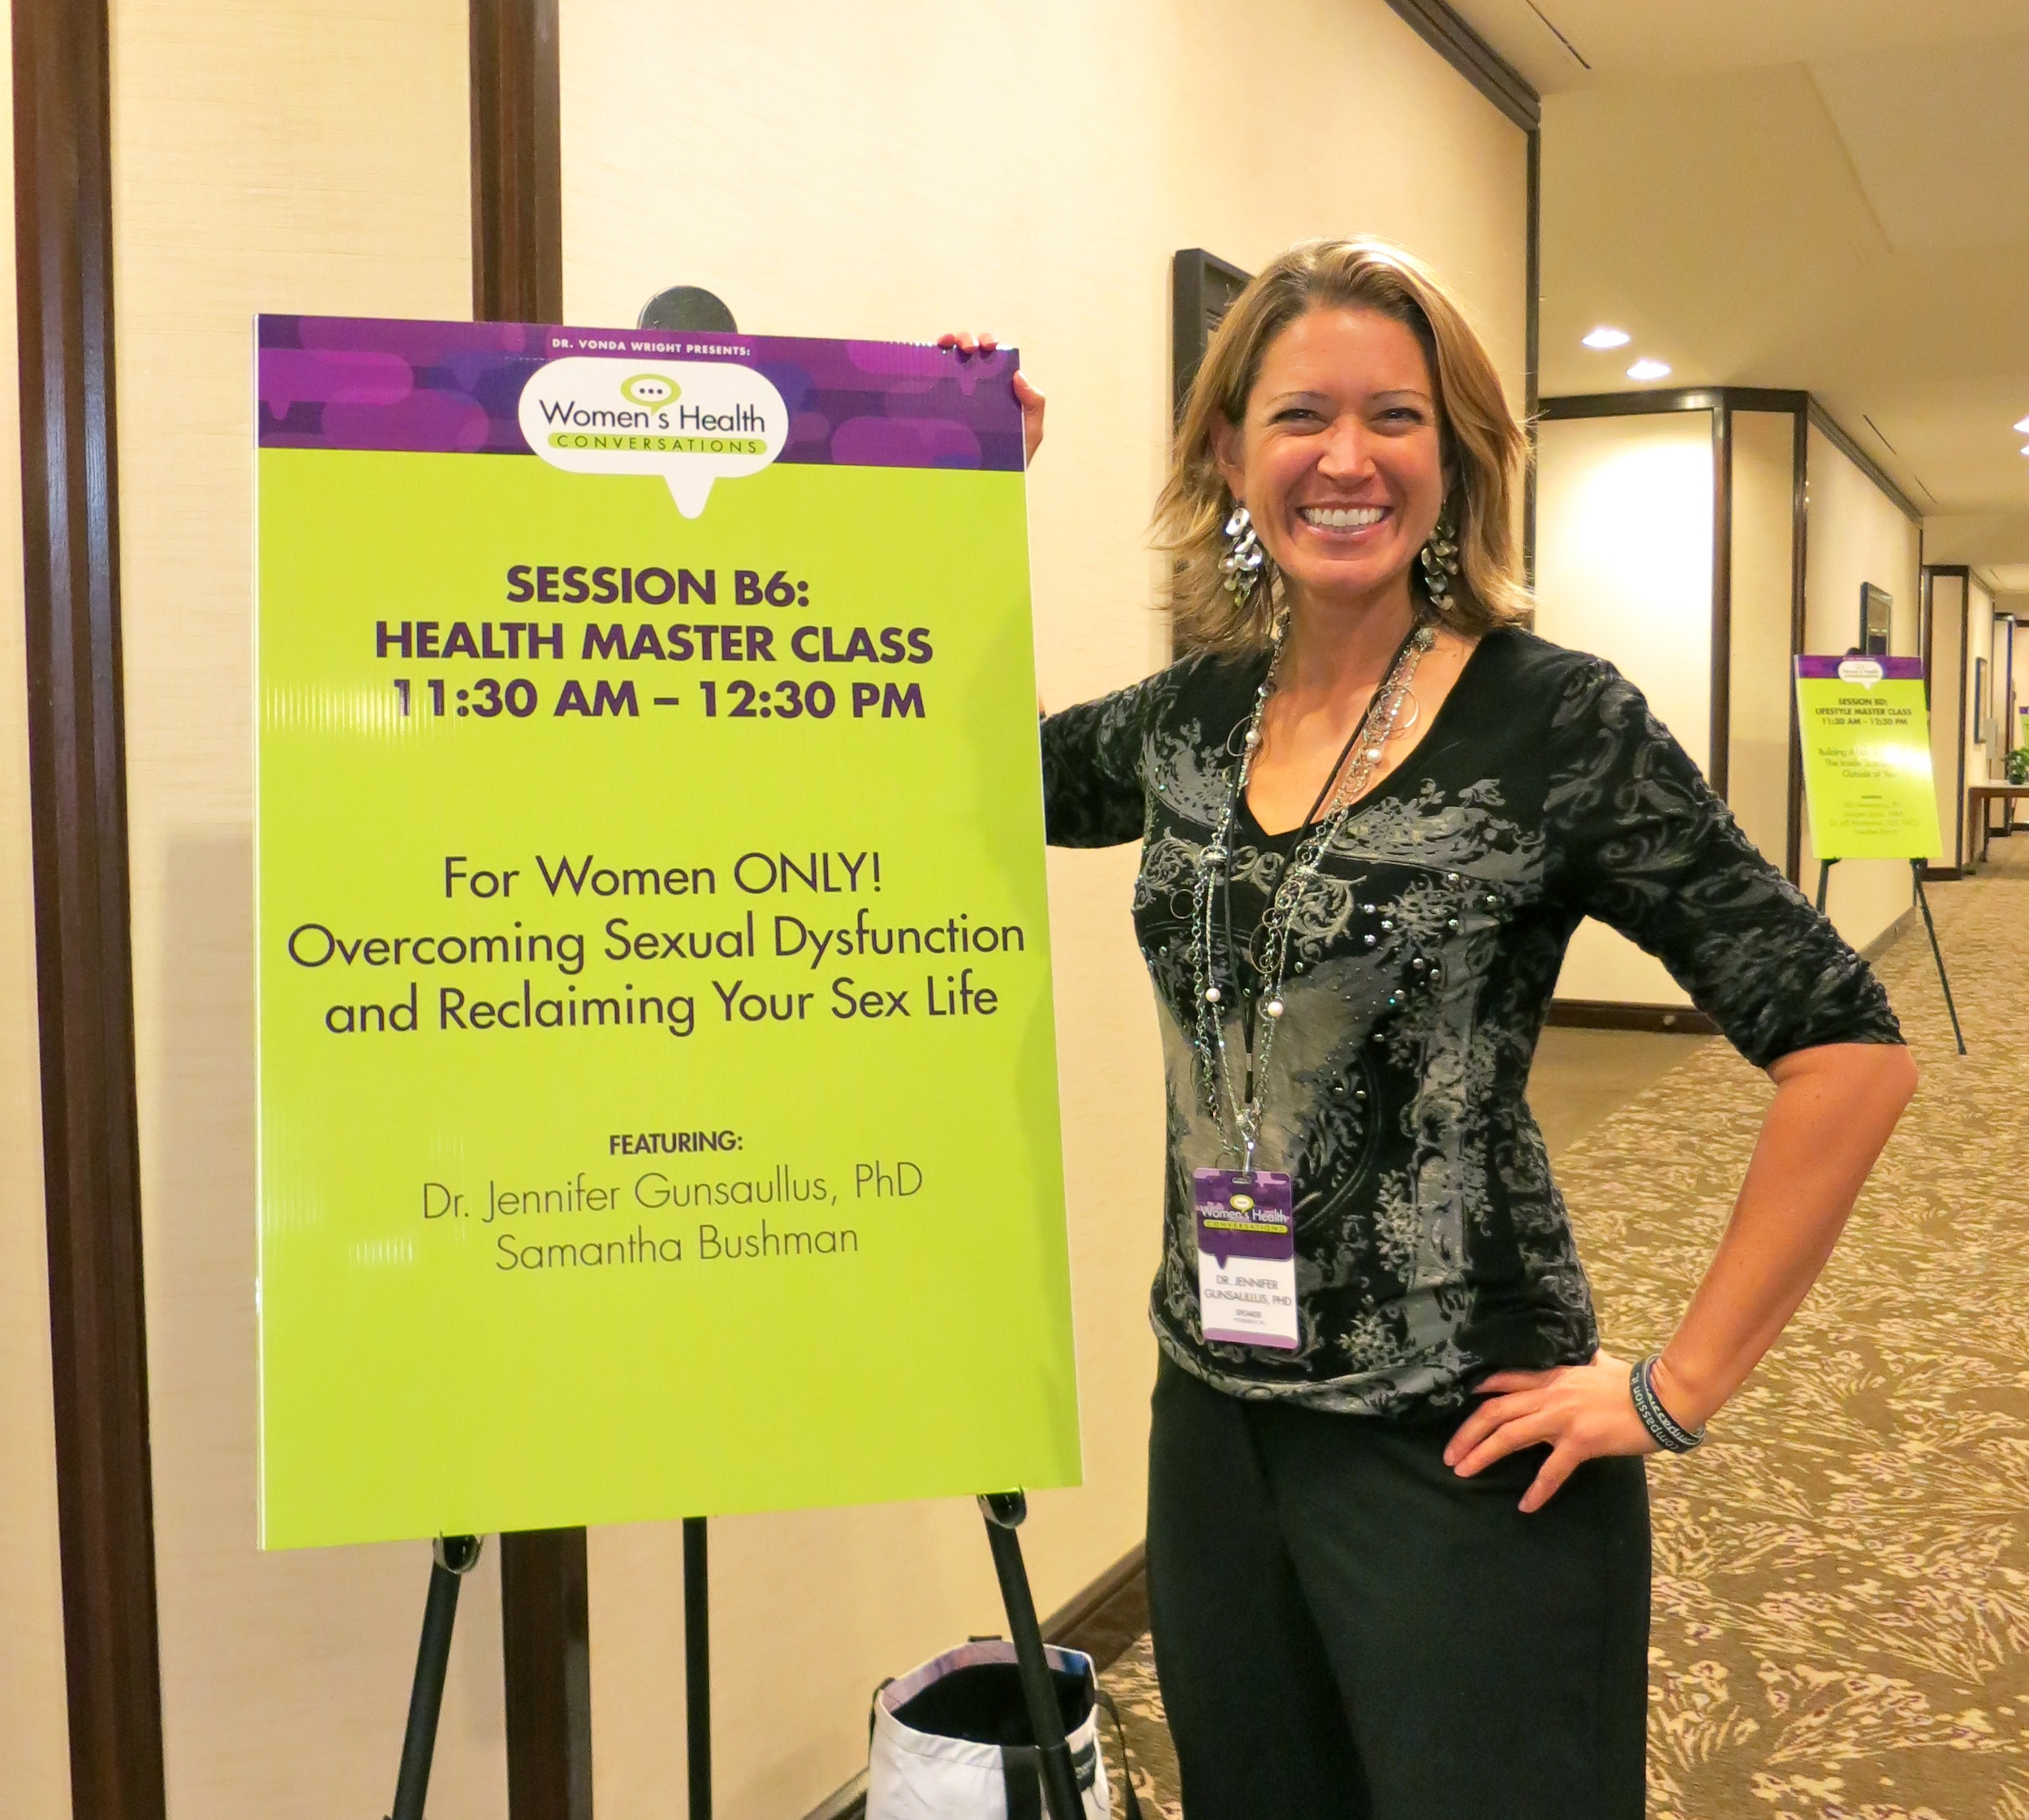 Overcoming Female Sexual Dysfunction at Women's Health Conference